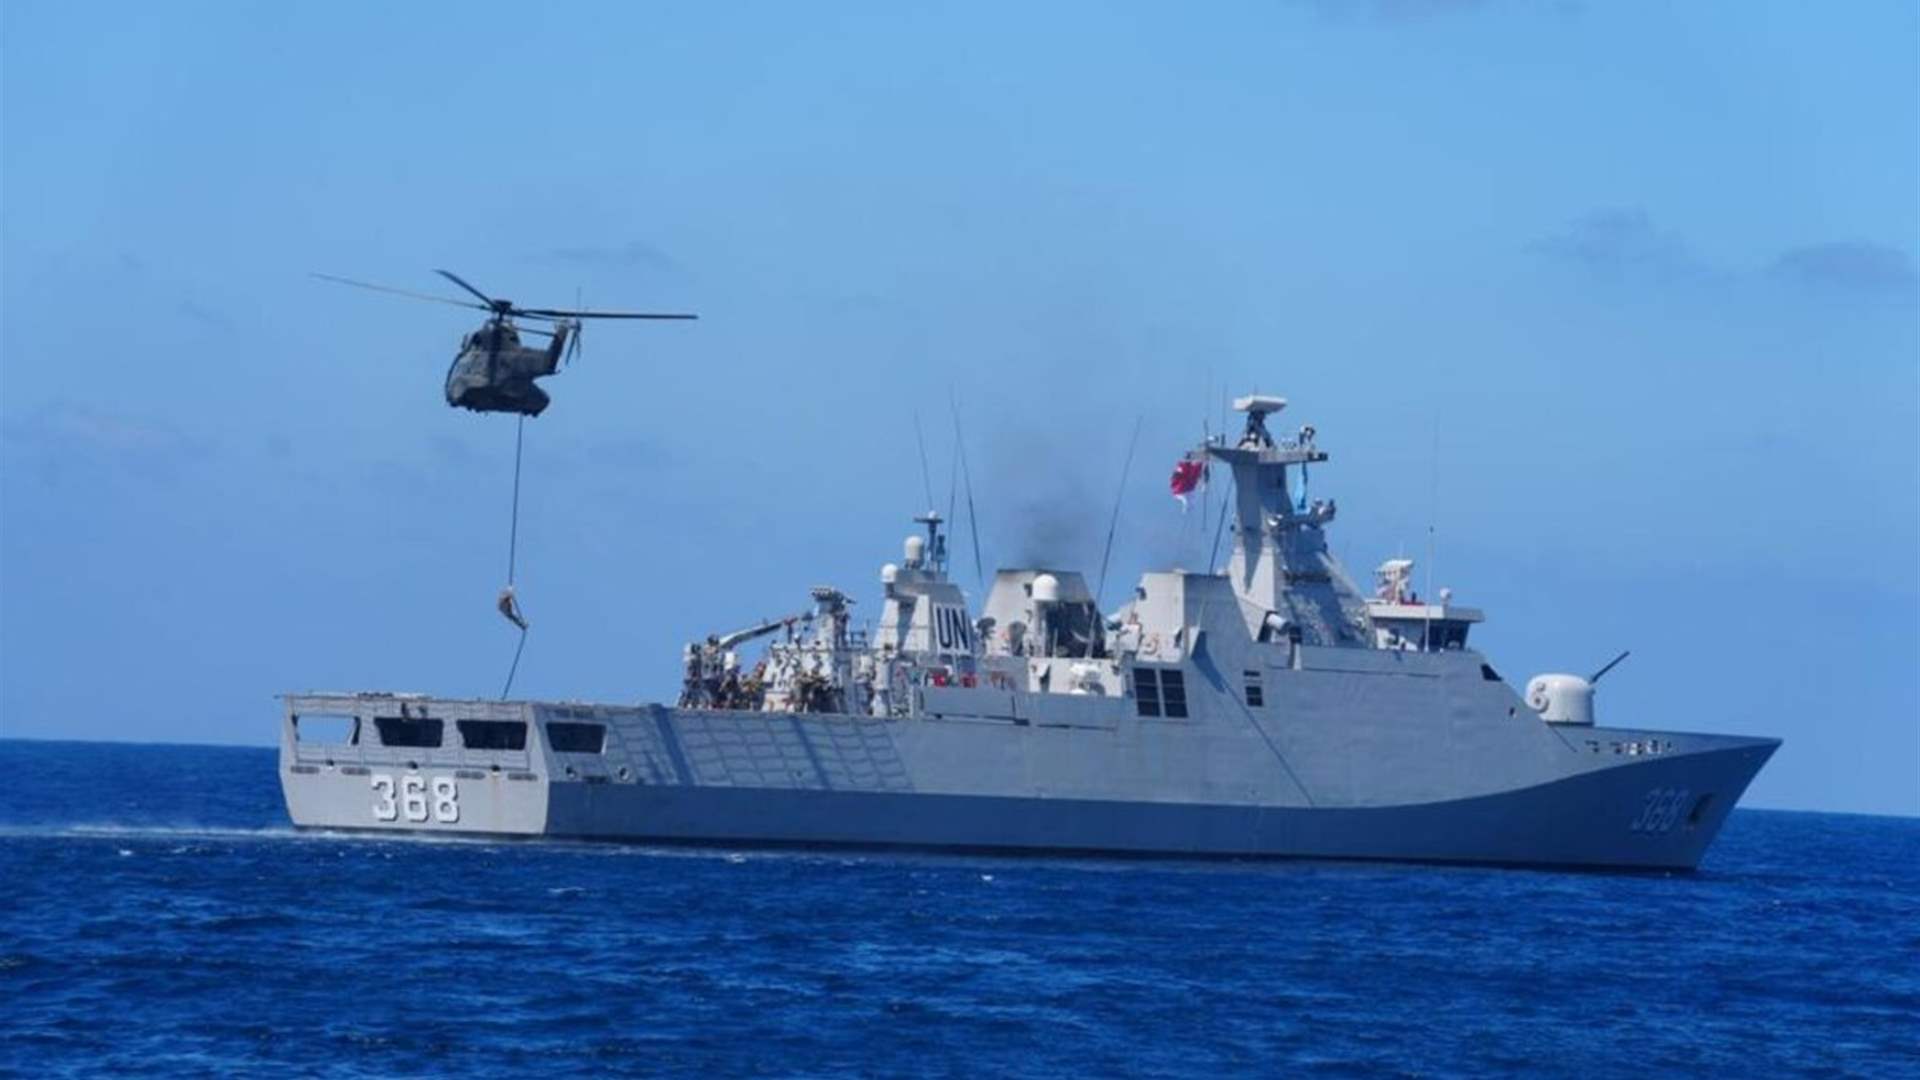 LAF-Navy showcases capabilities, shows step towards achieving maritime security goals 